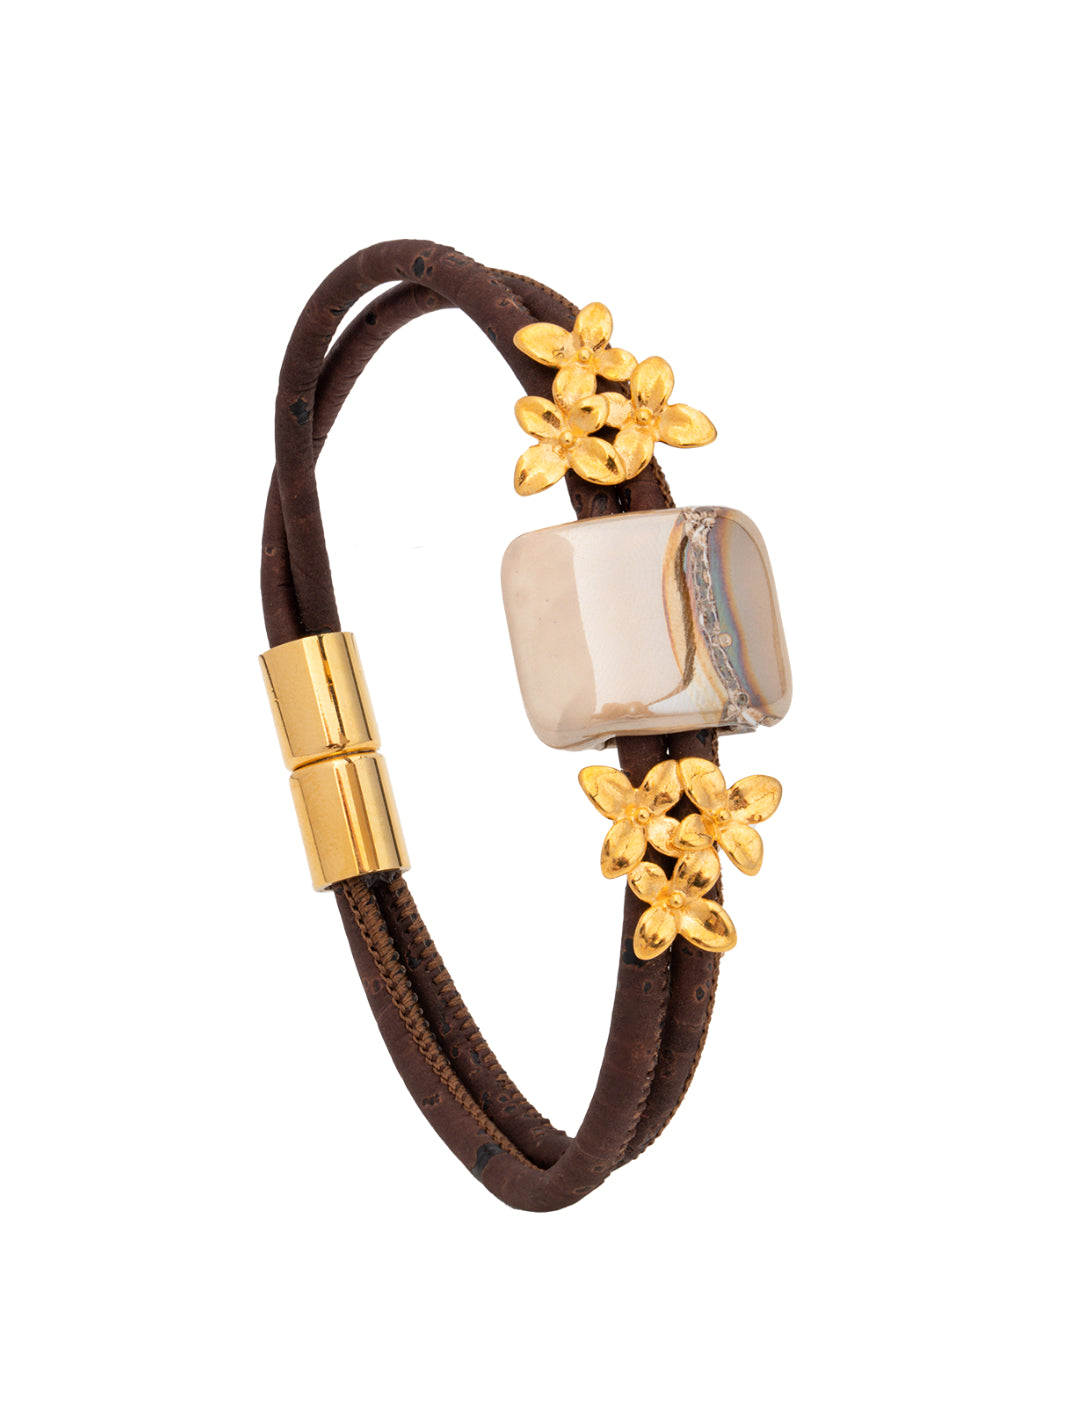 Introducing the IBERIS Cork Bracelet: where sustainable cork meets contemporary elegance. Lightweight, with a magnetic clasp for easy wear, adorned with floral motifs and ceramic stones. Stylish, eco-conscious jewelry.